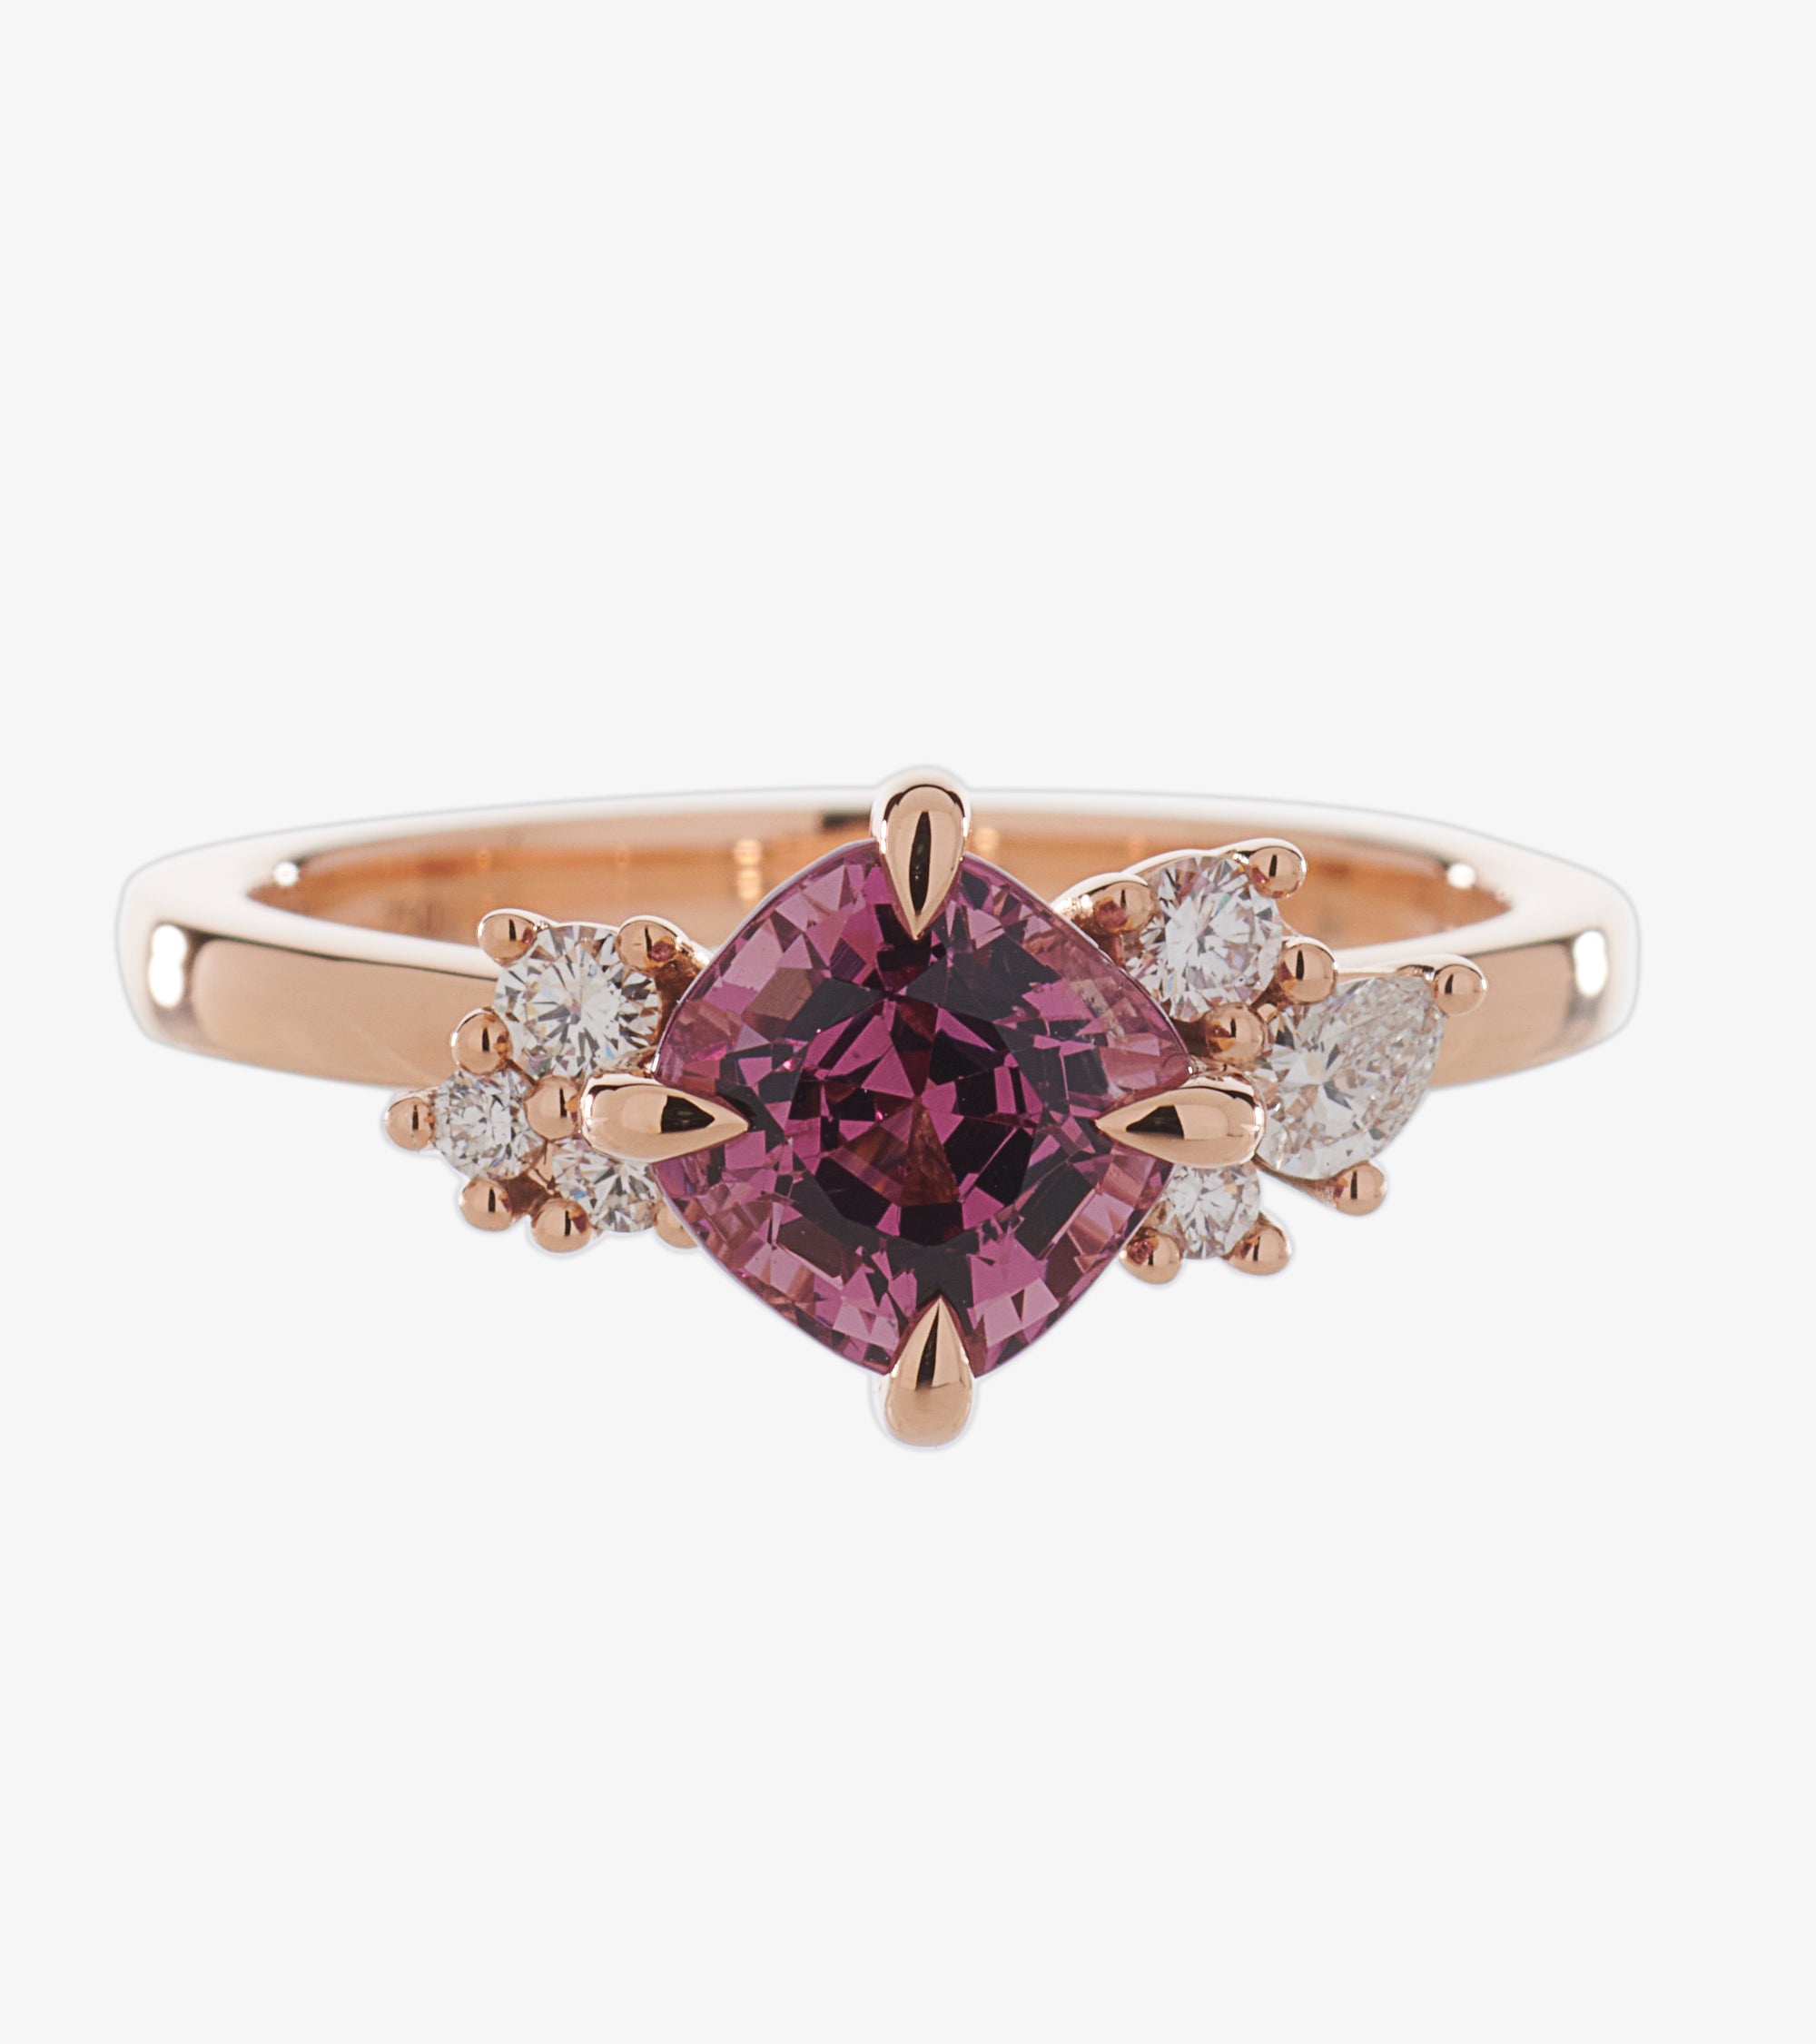 1.44ct Spinel Galaxy Ring - Carrie K. 